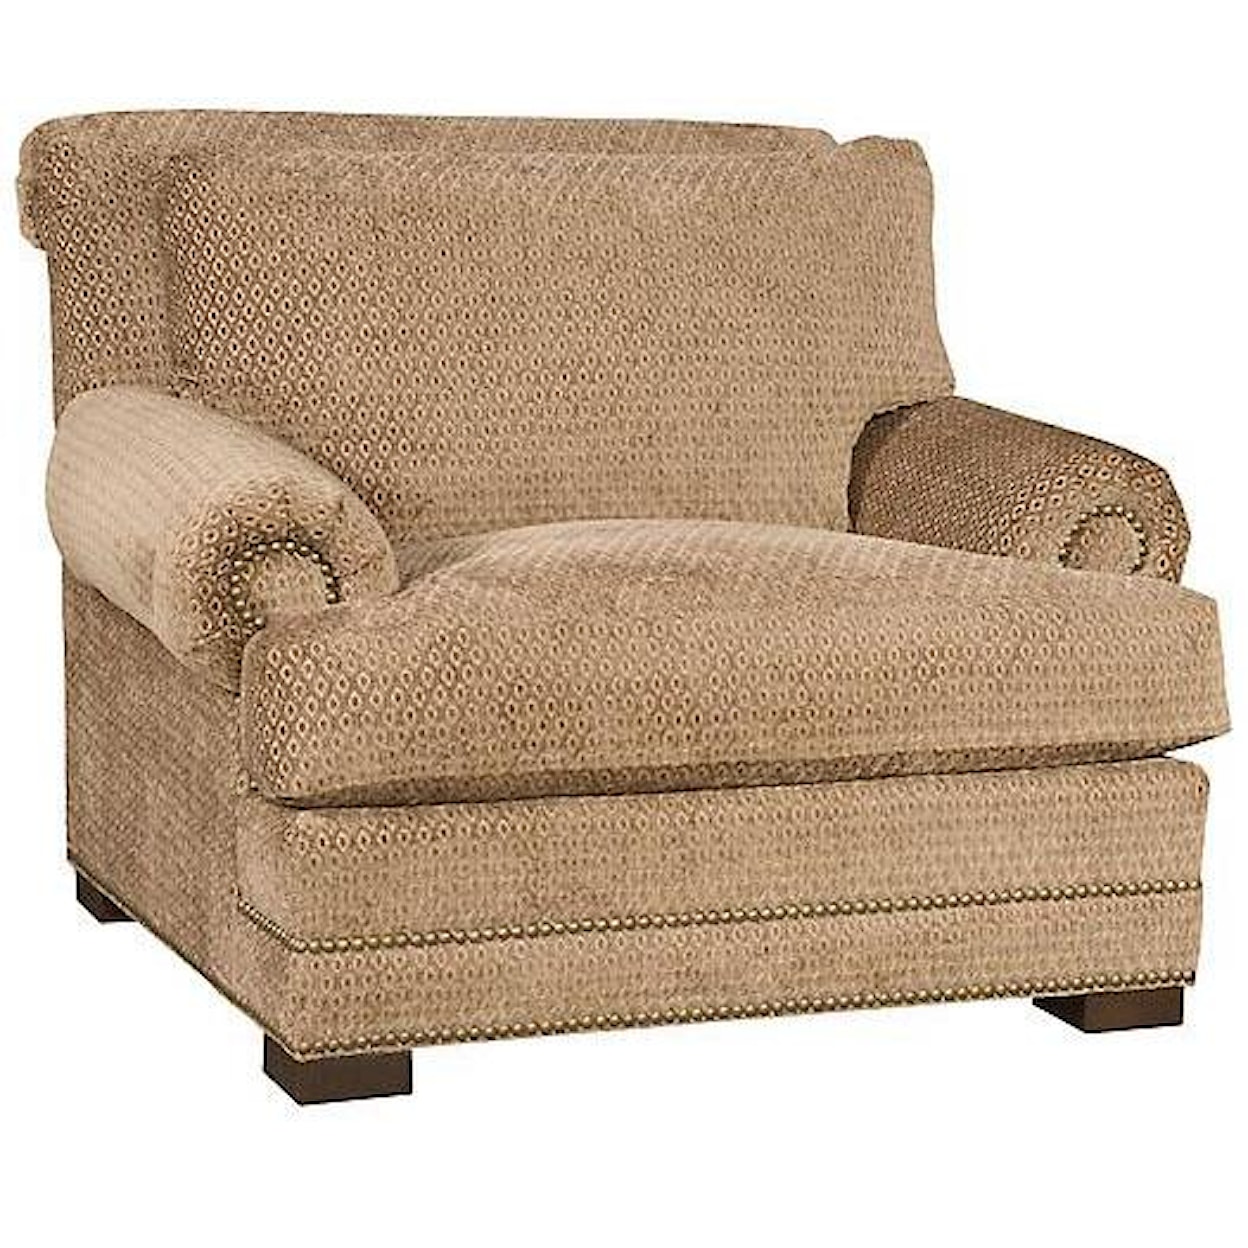 King Hickory Barclay Upholstered Chair